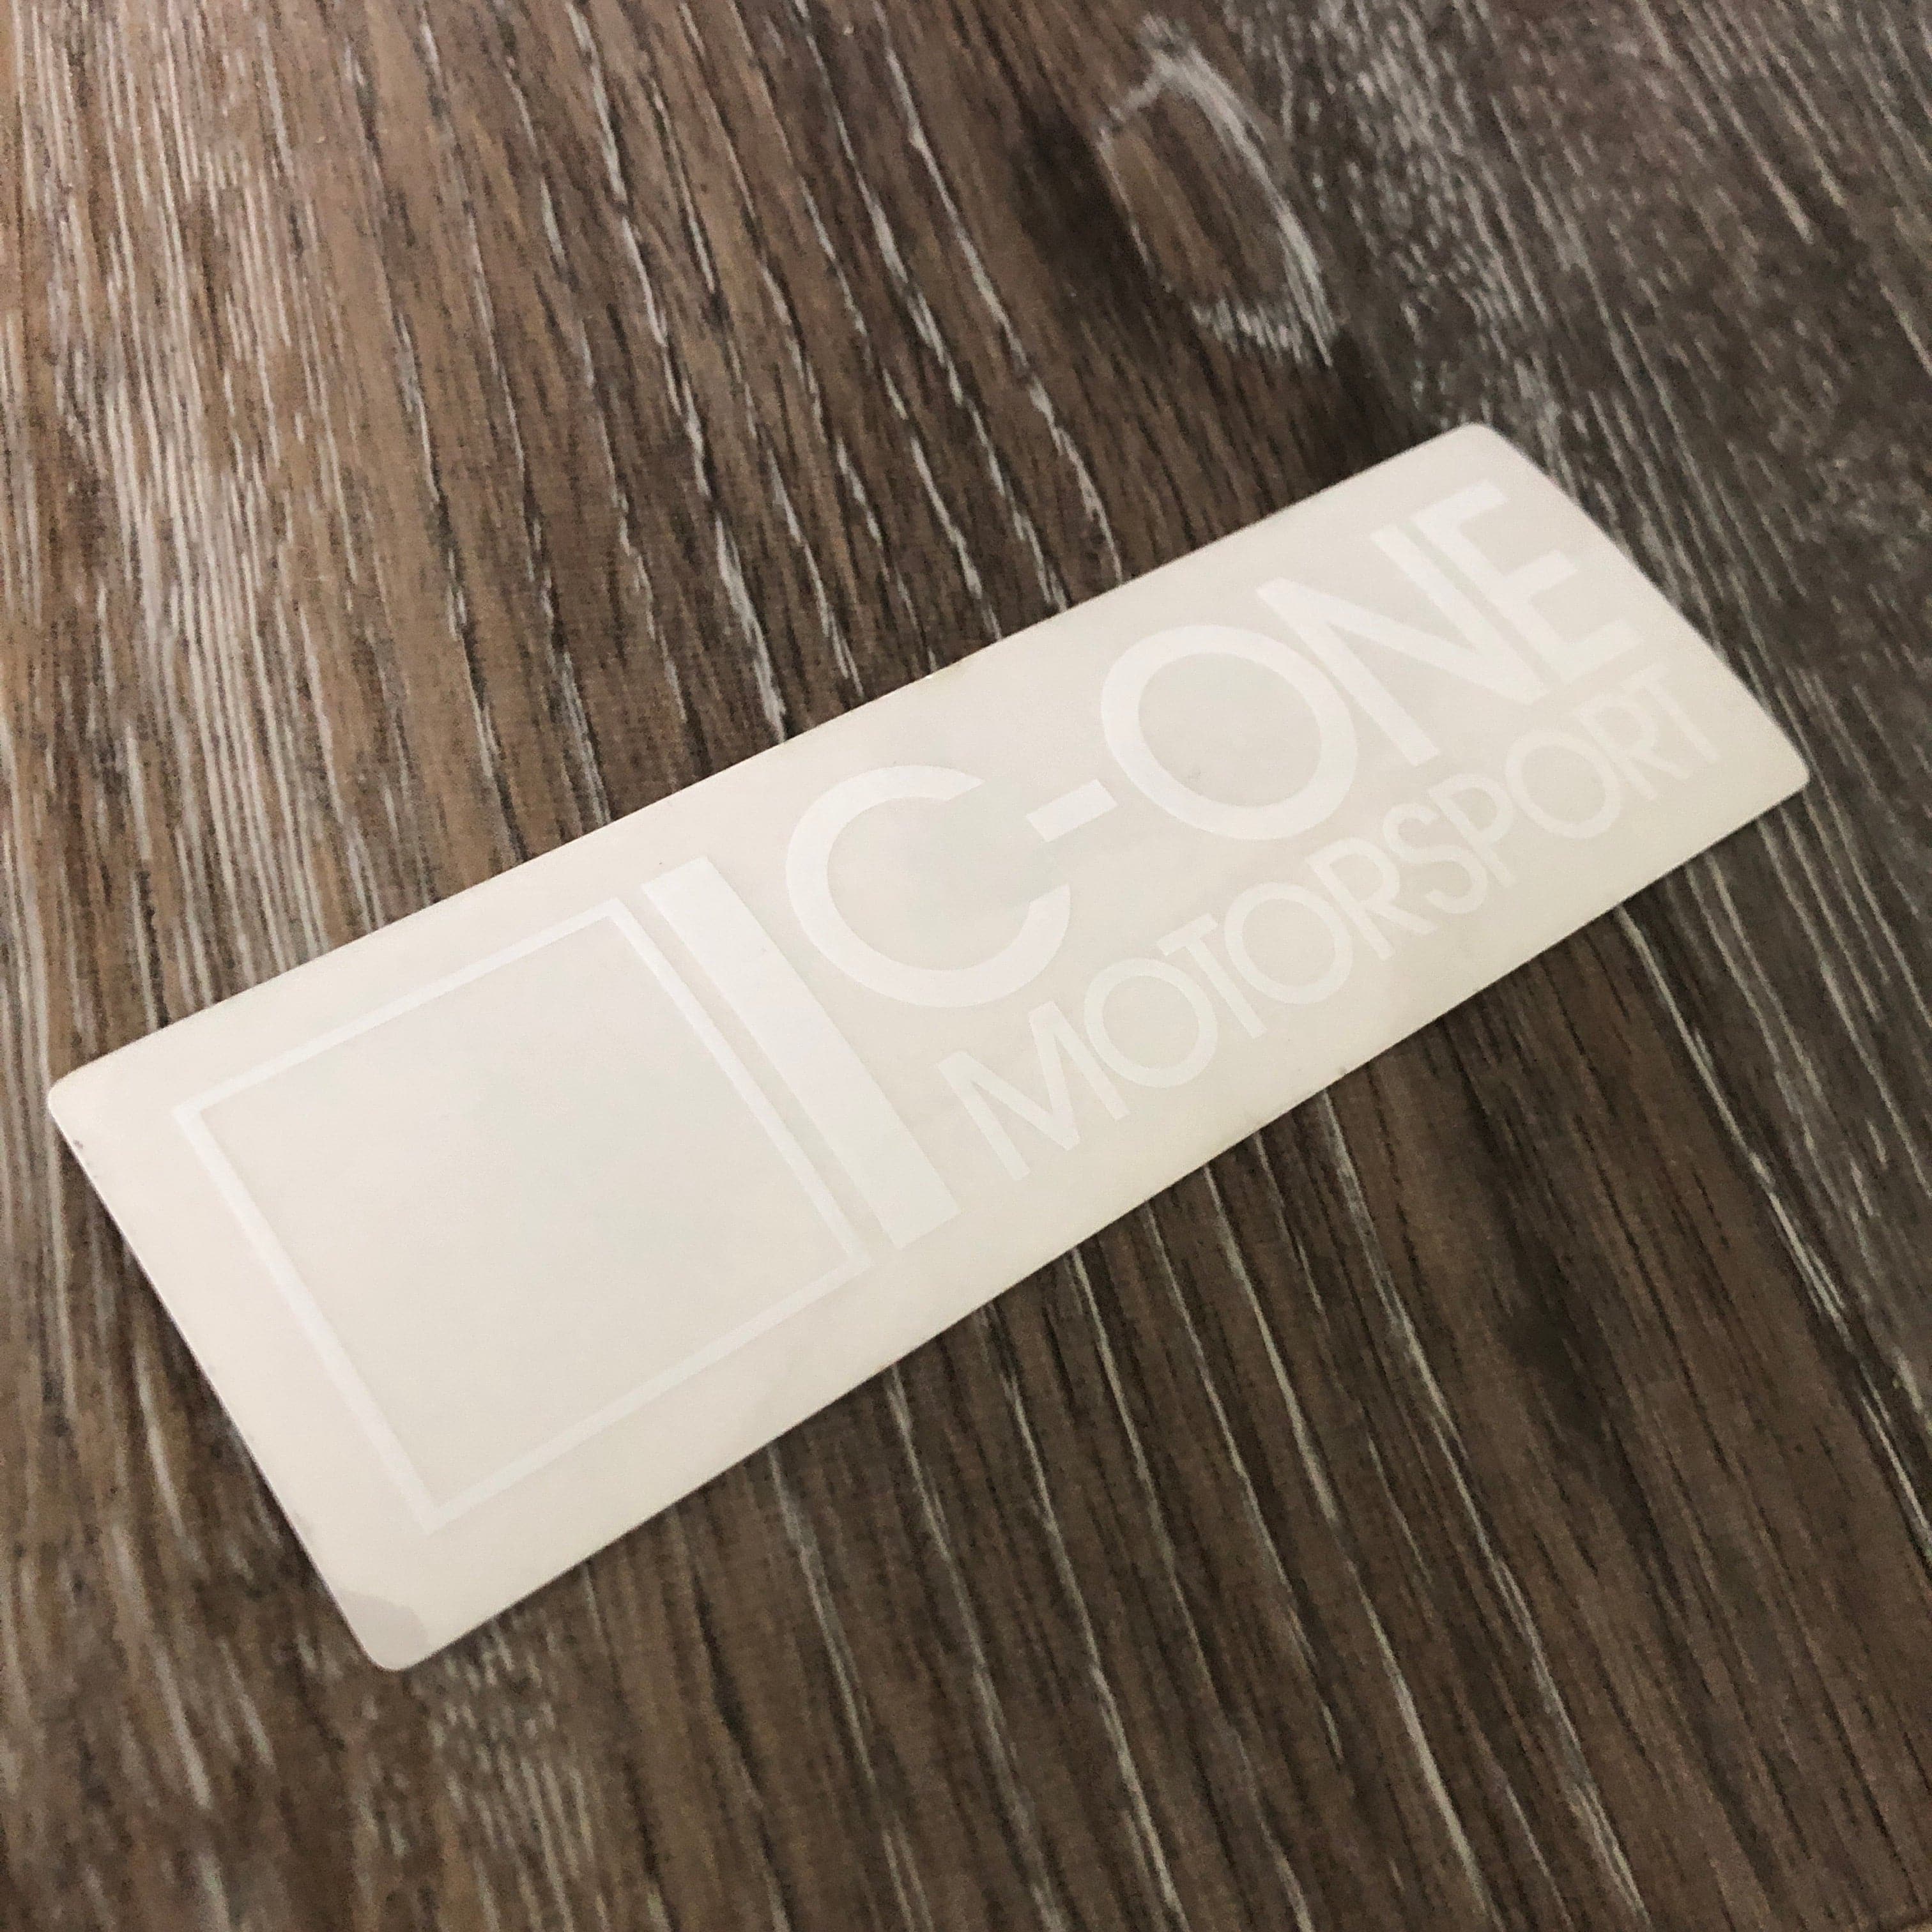 C-One Small White Decal